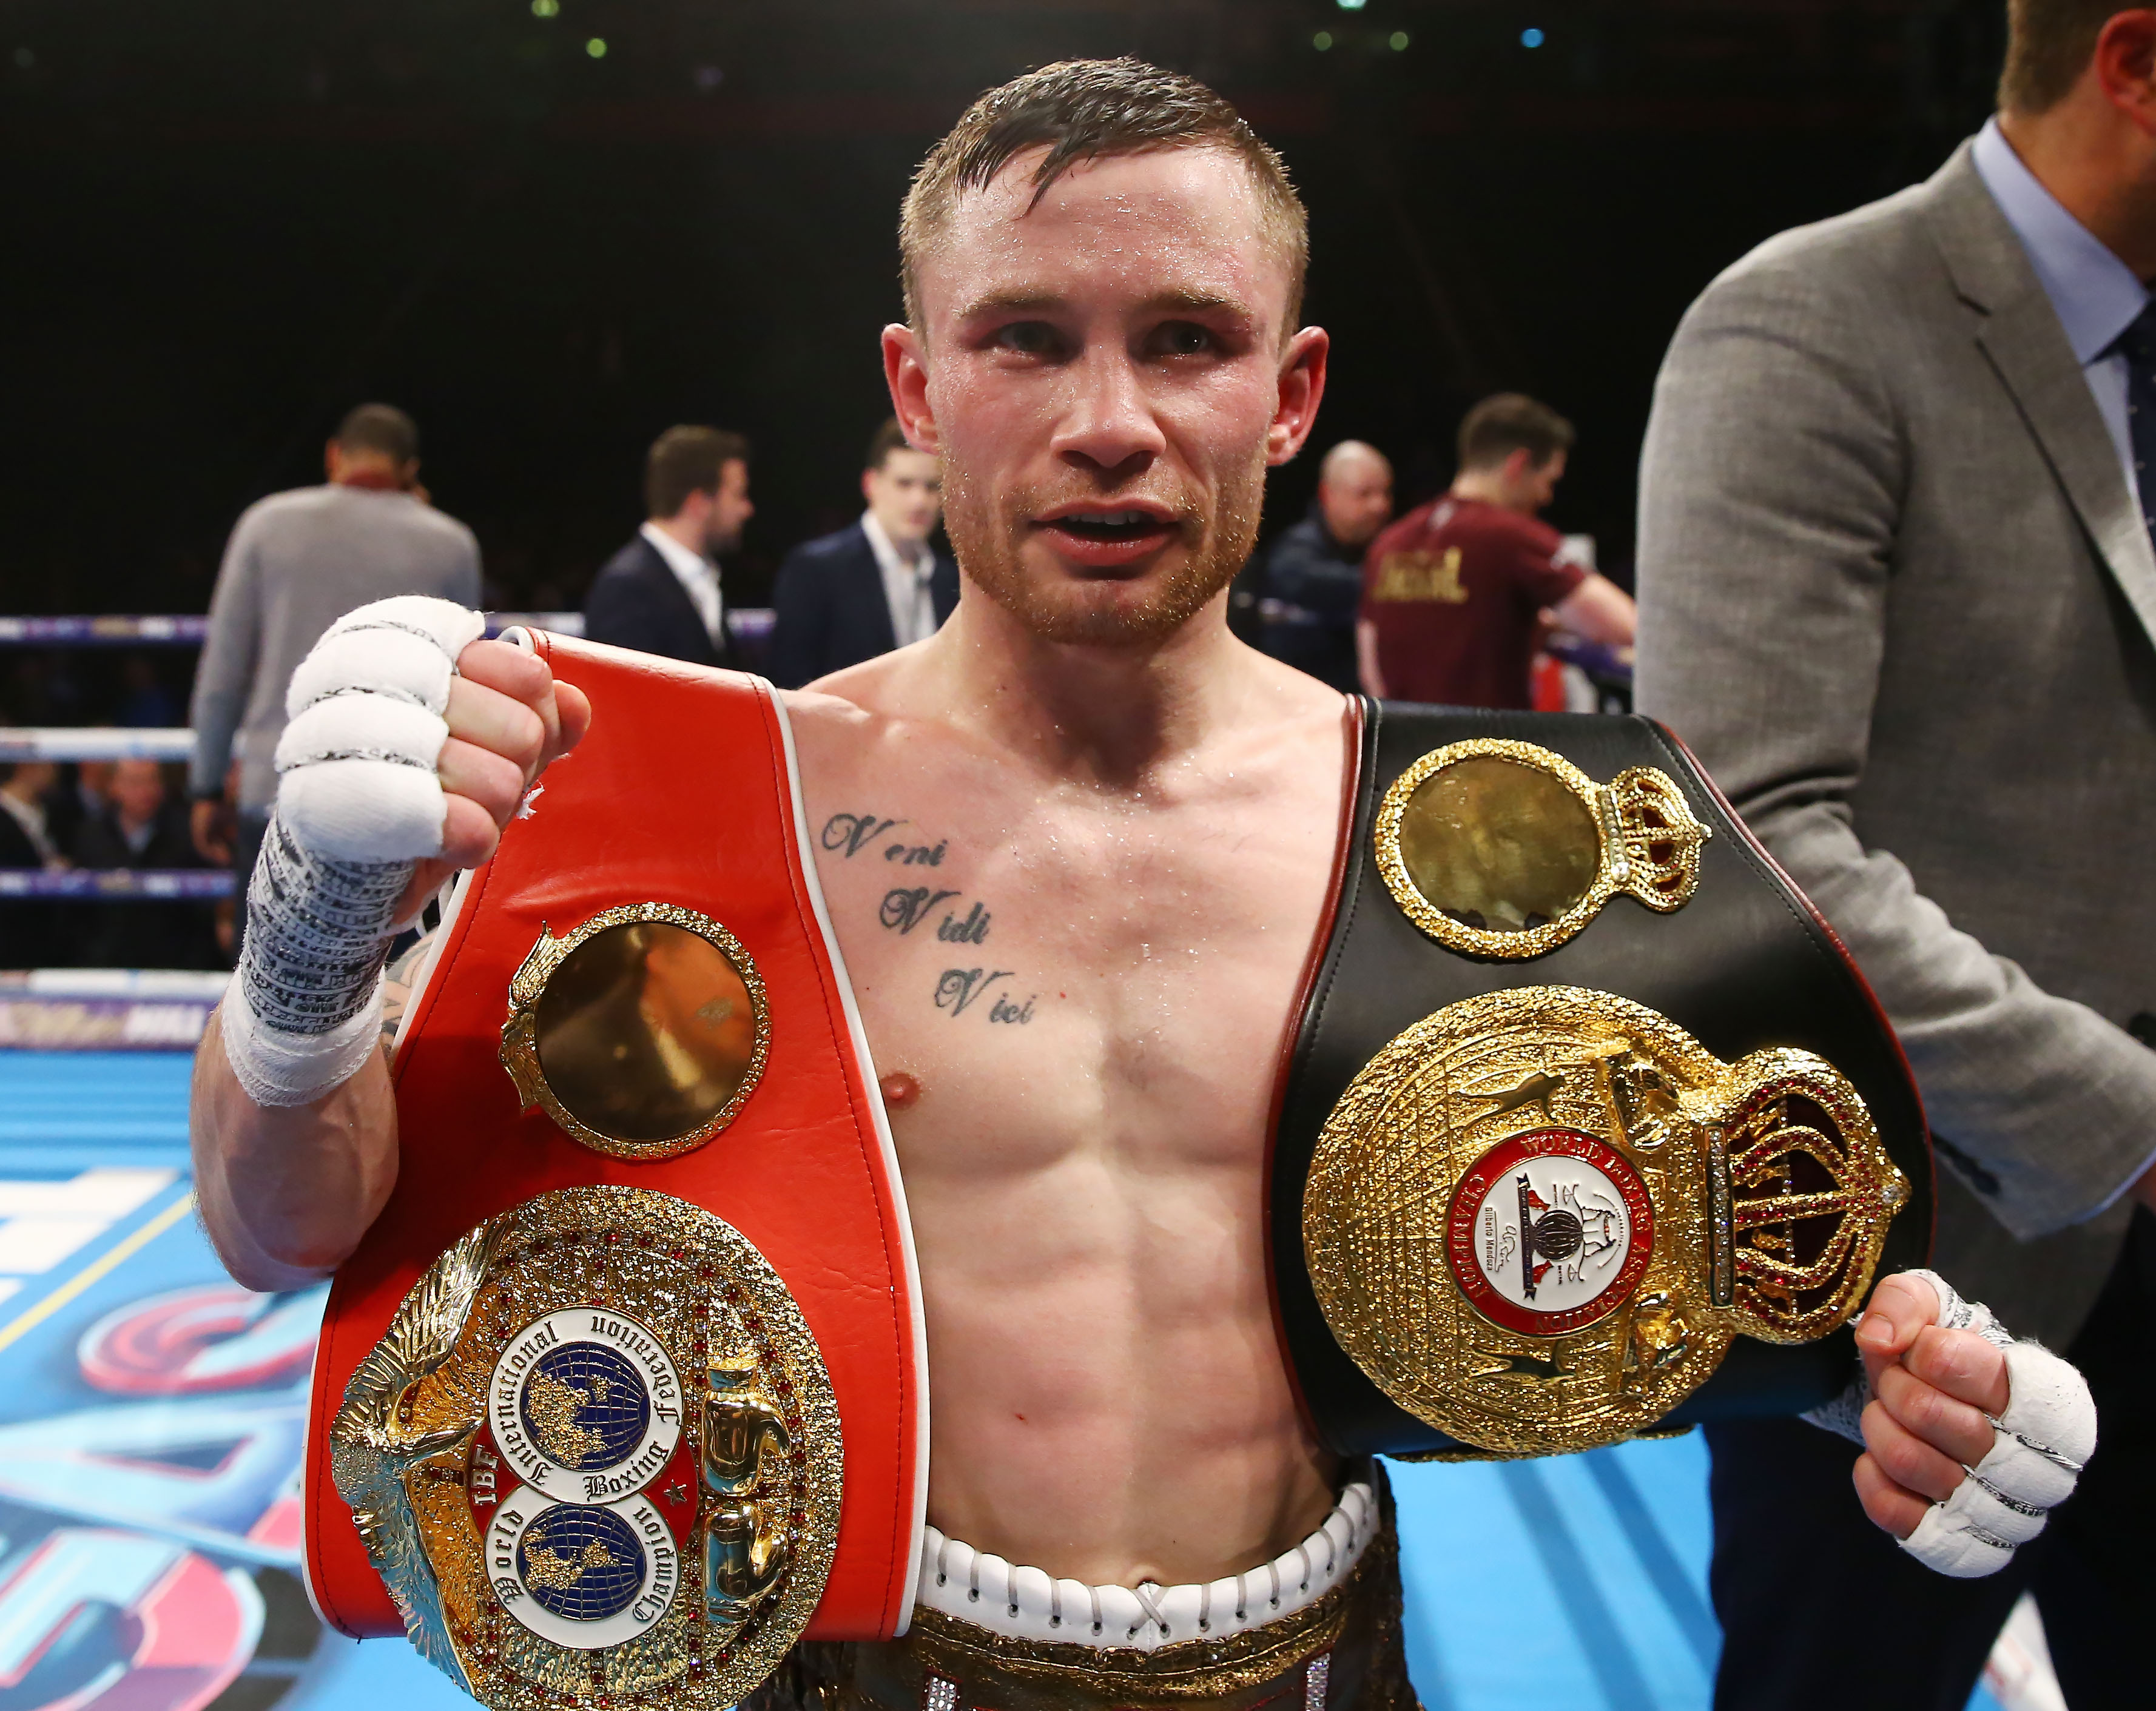 Carl Frampton looks set to relinquish his IBF and WBA super-bantamweight titles in order to move up to featherweight and challenge Leo Santa Cruz according to US broadcaster, Showtime\nPress Eye - Belfast -  